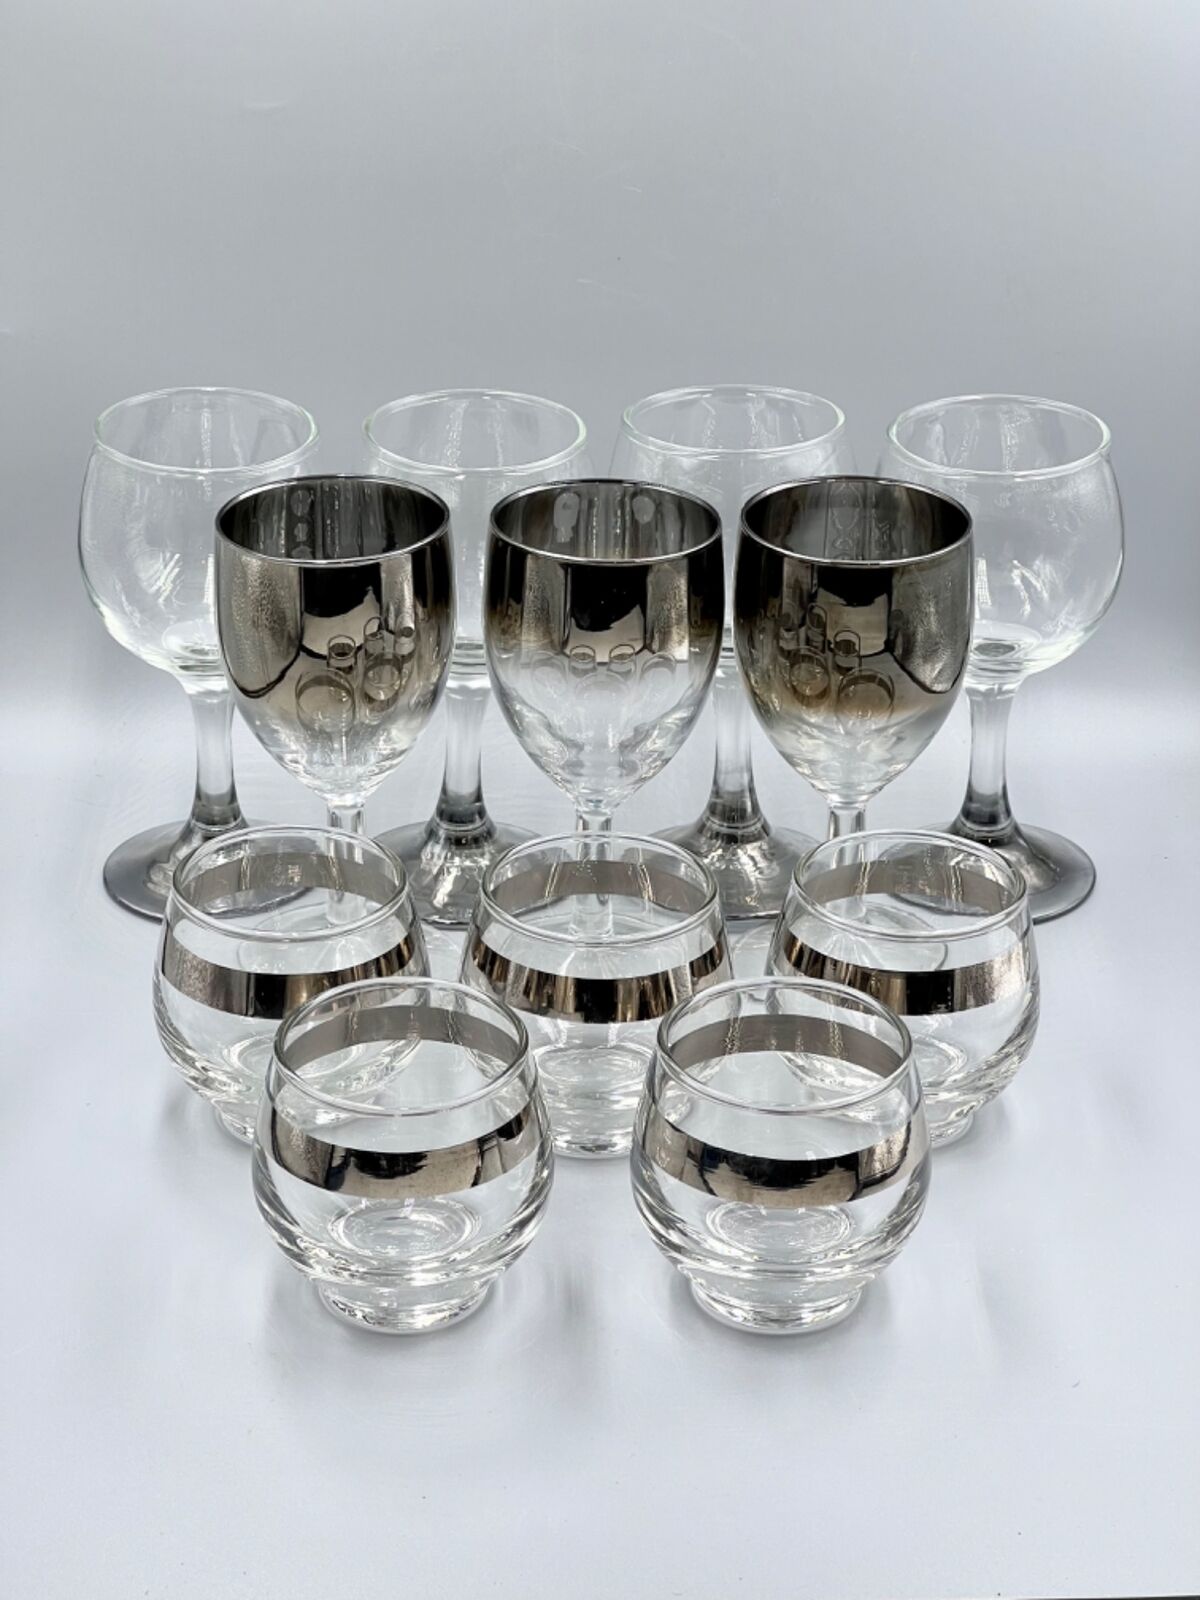 VTG 12 Pc. Dorothy Thorpe Style Silver Accent Glasses-Roly Poly/Cordial/Snifter